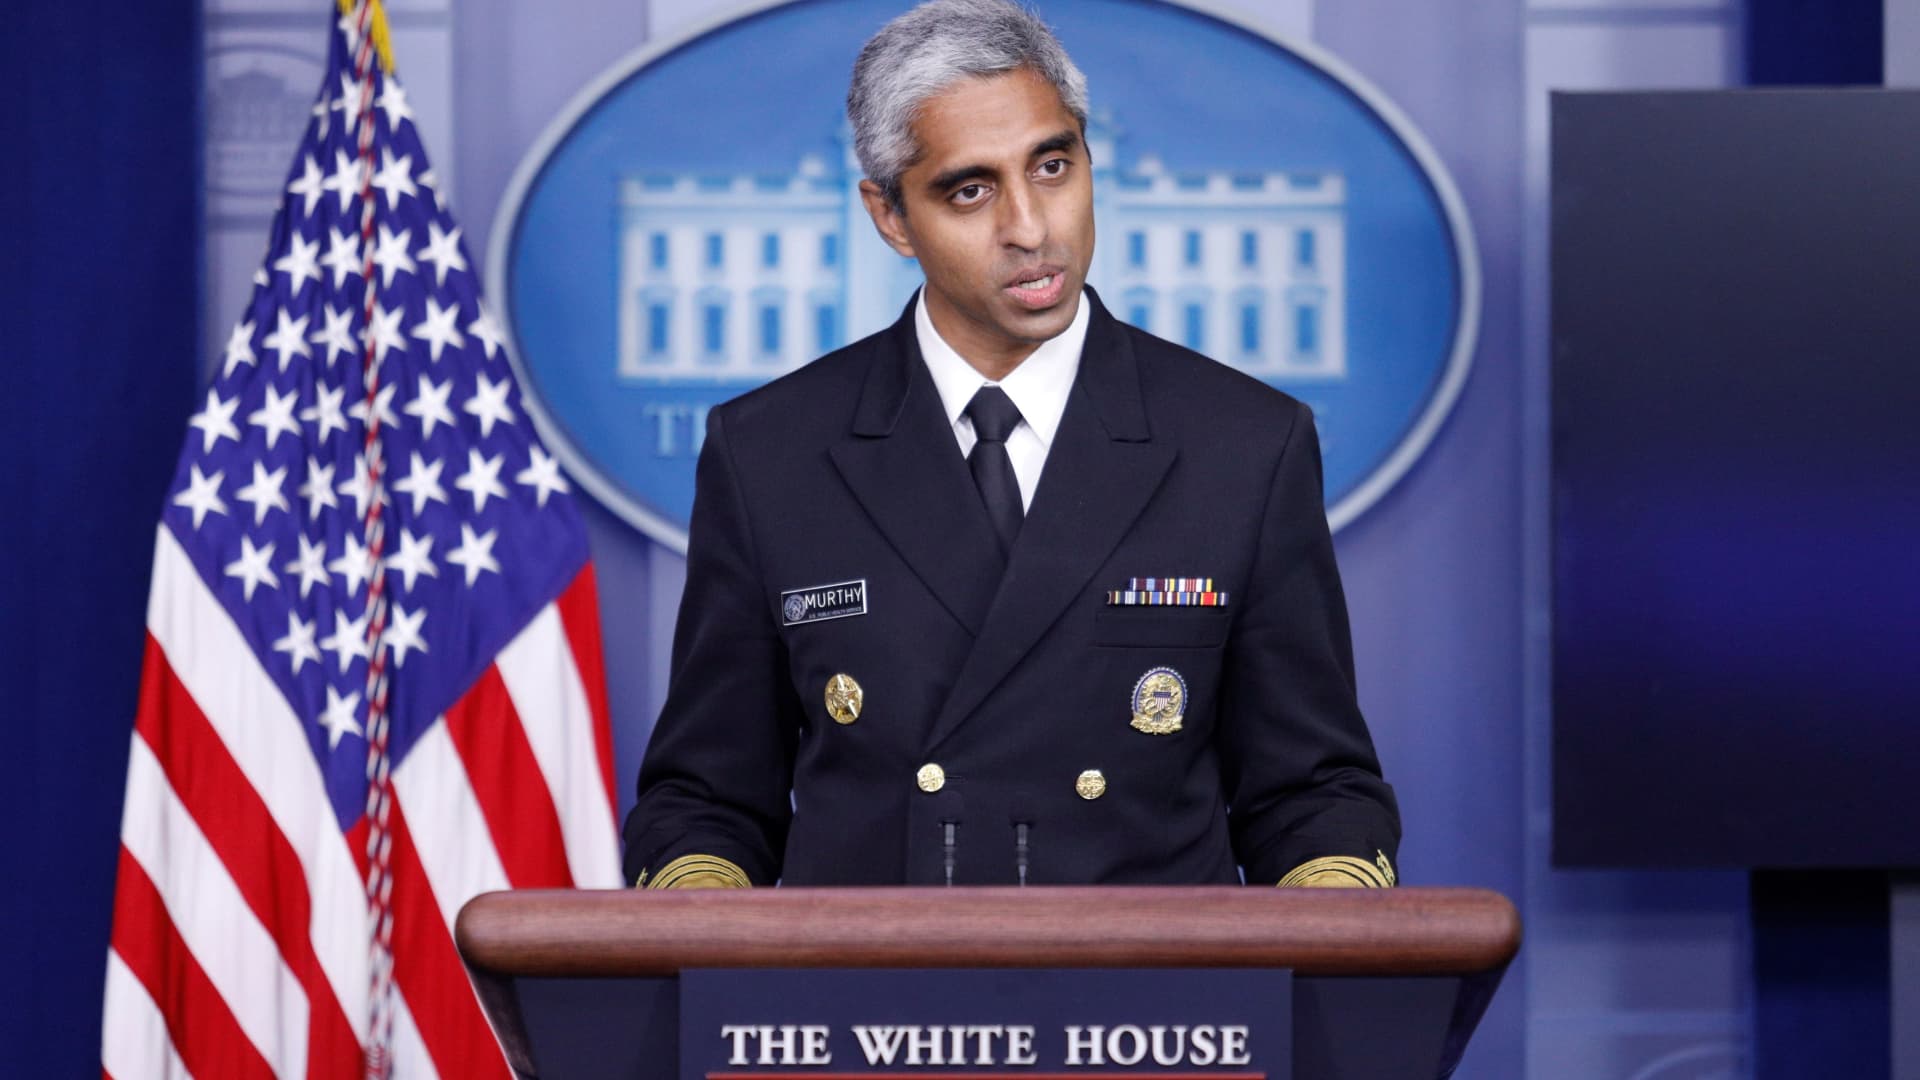 U.S. Surgeon General: We need to protect kids from social media risks immediately